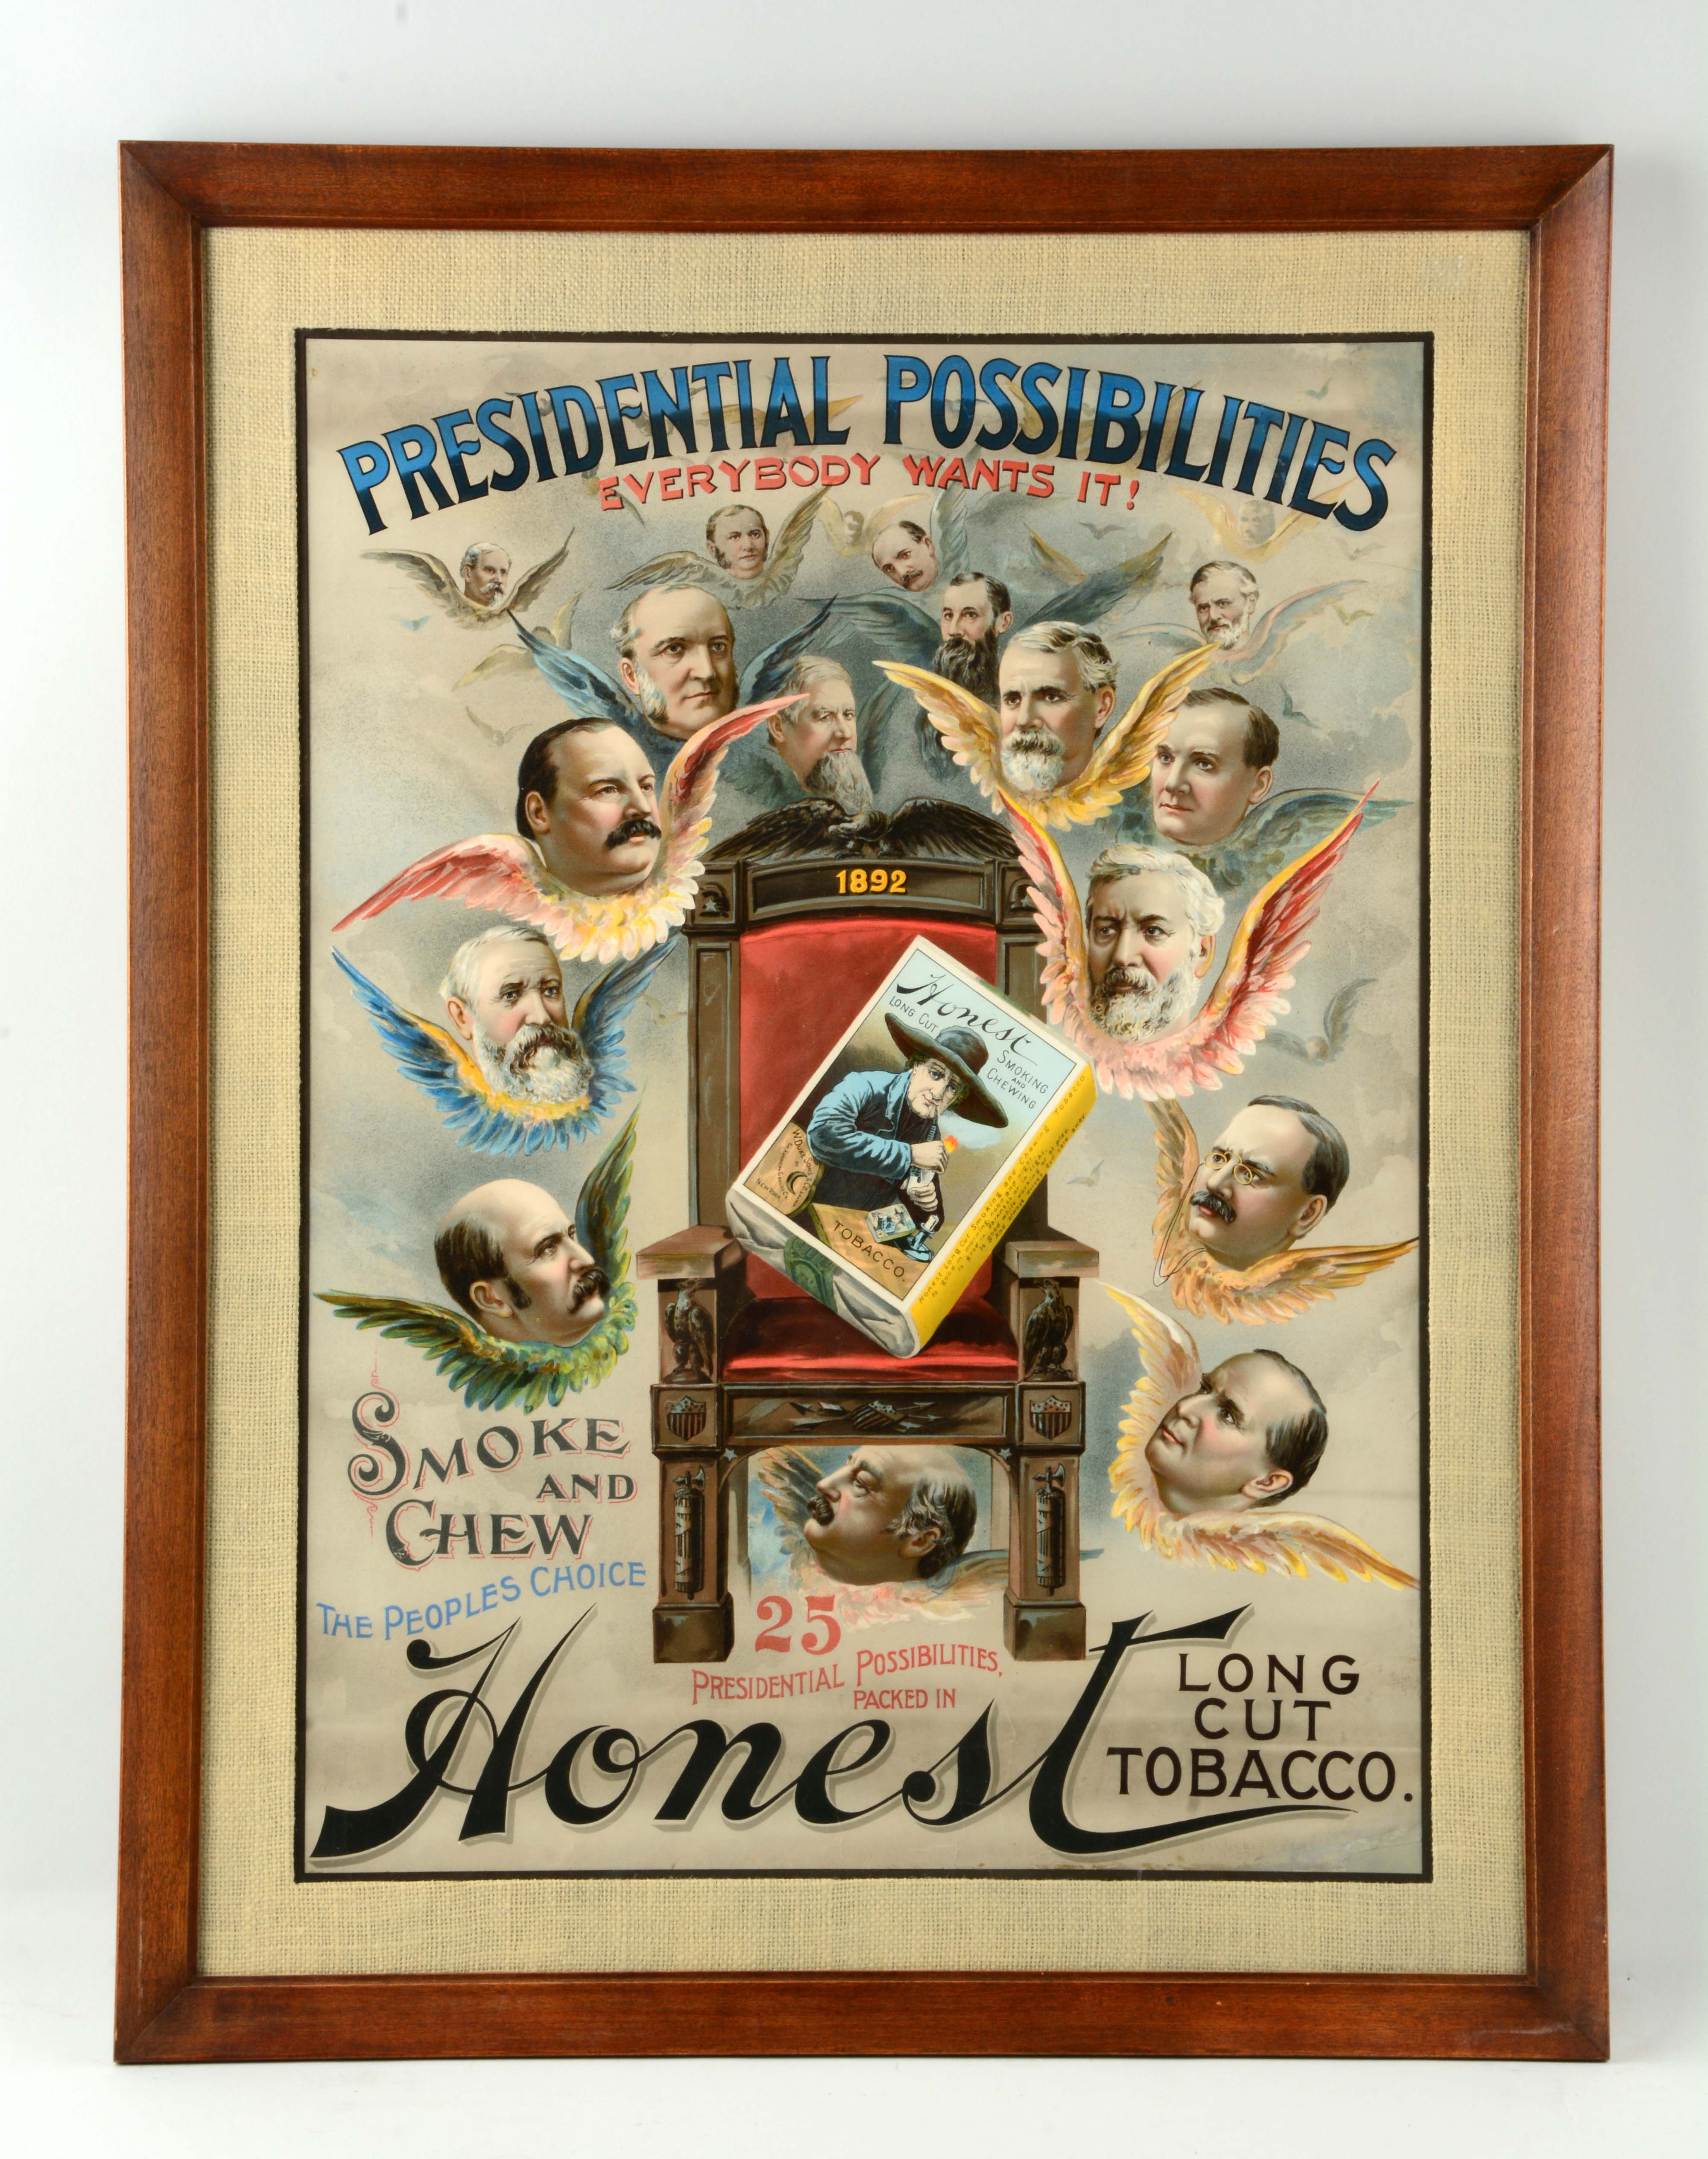 Honest Brand Tobacco Paper Poster, estimated at $2,500-5,000.